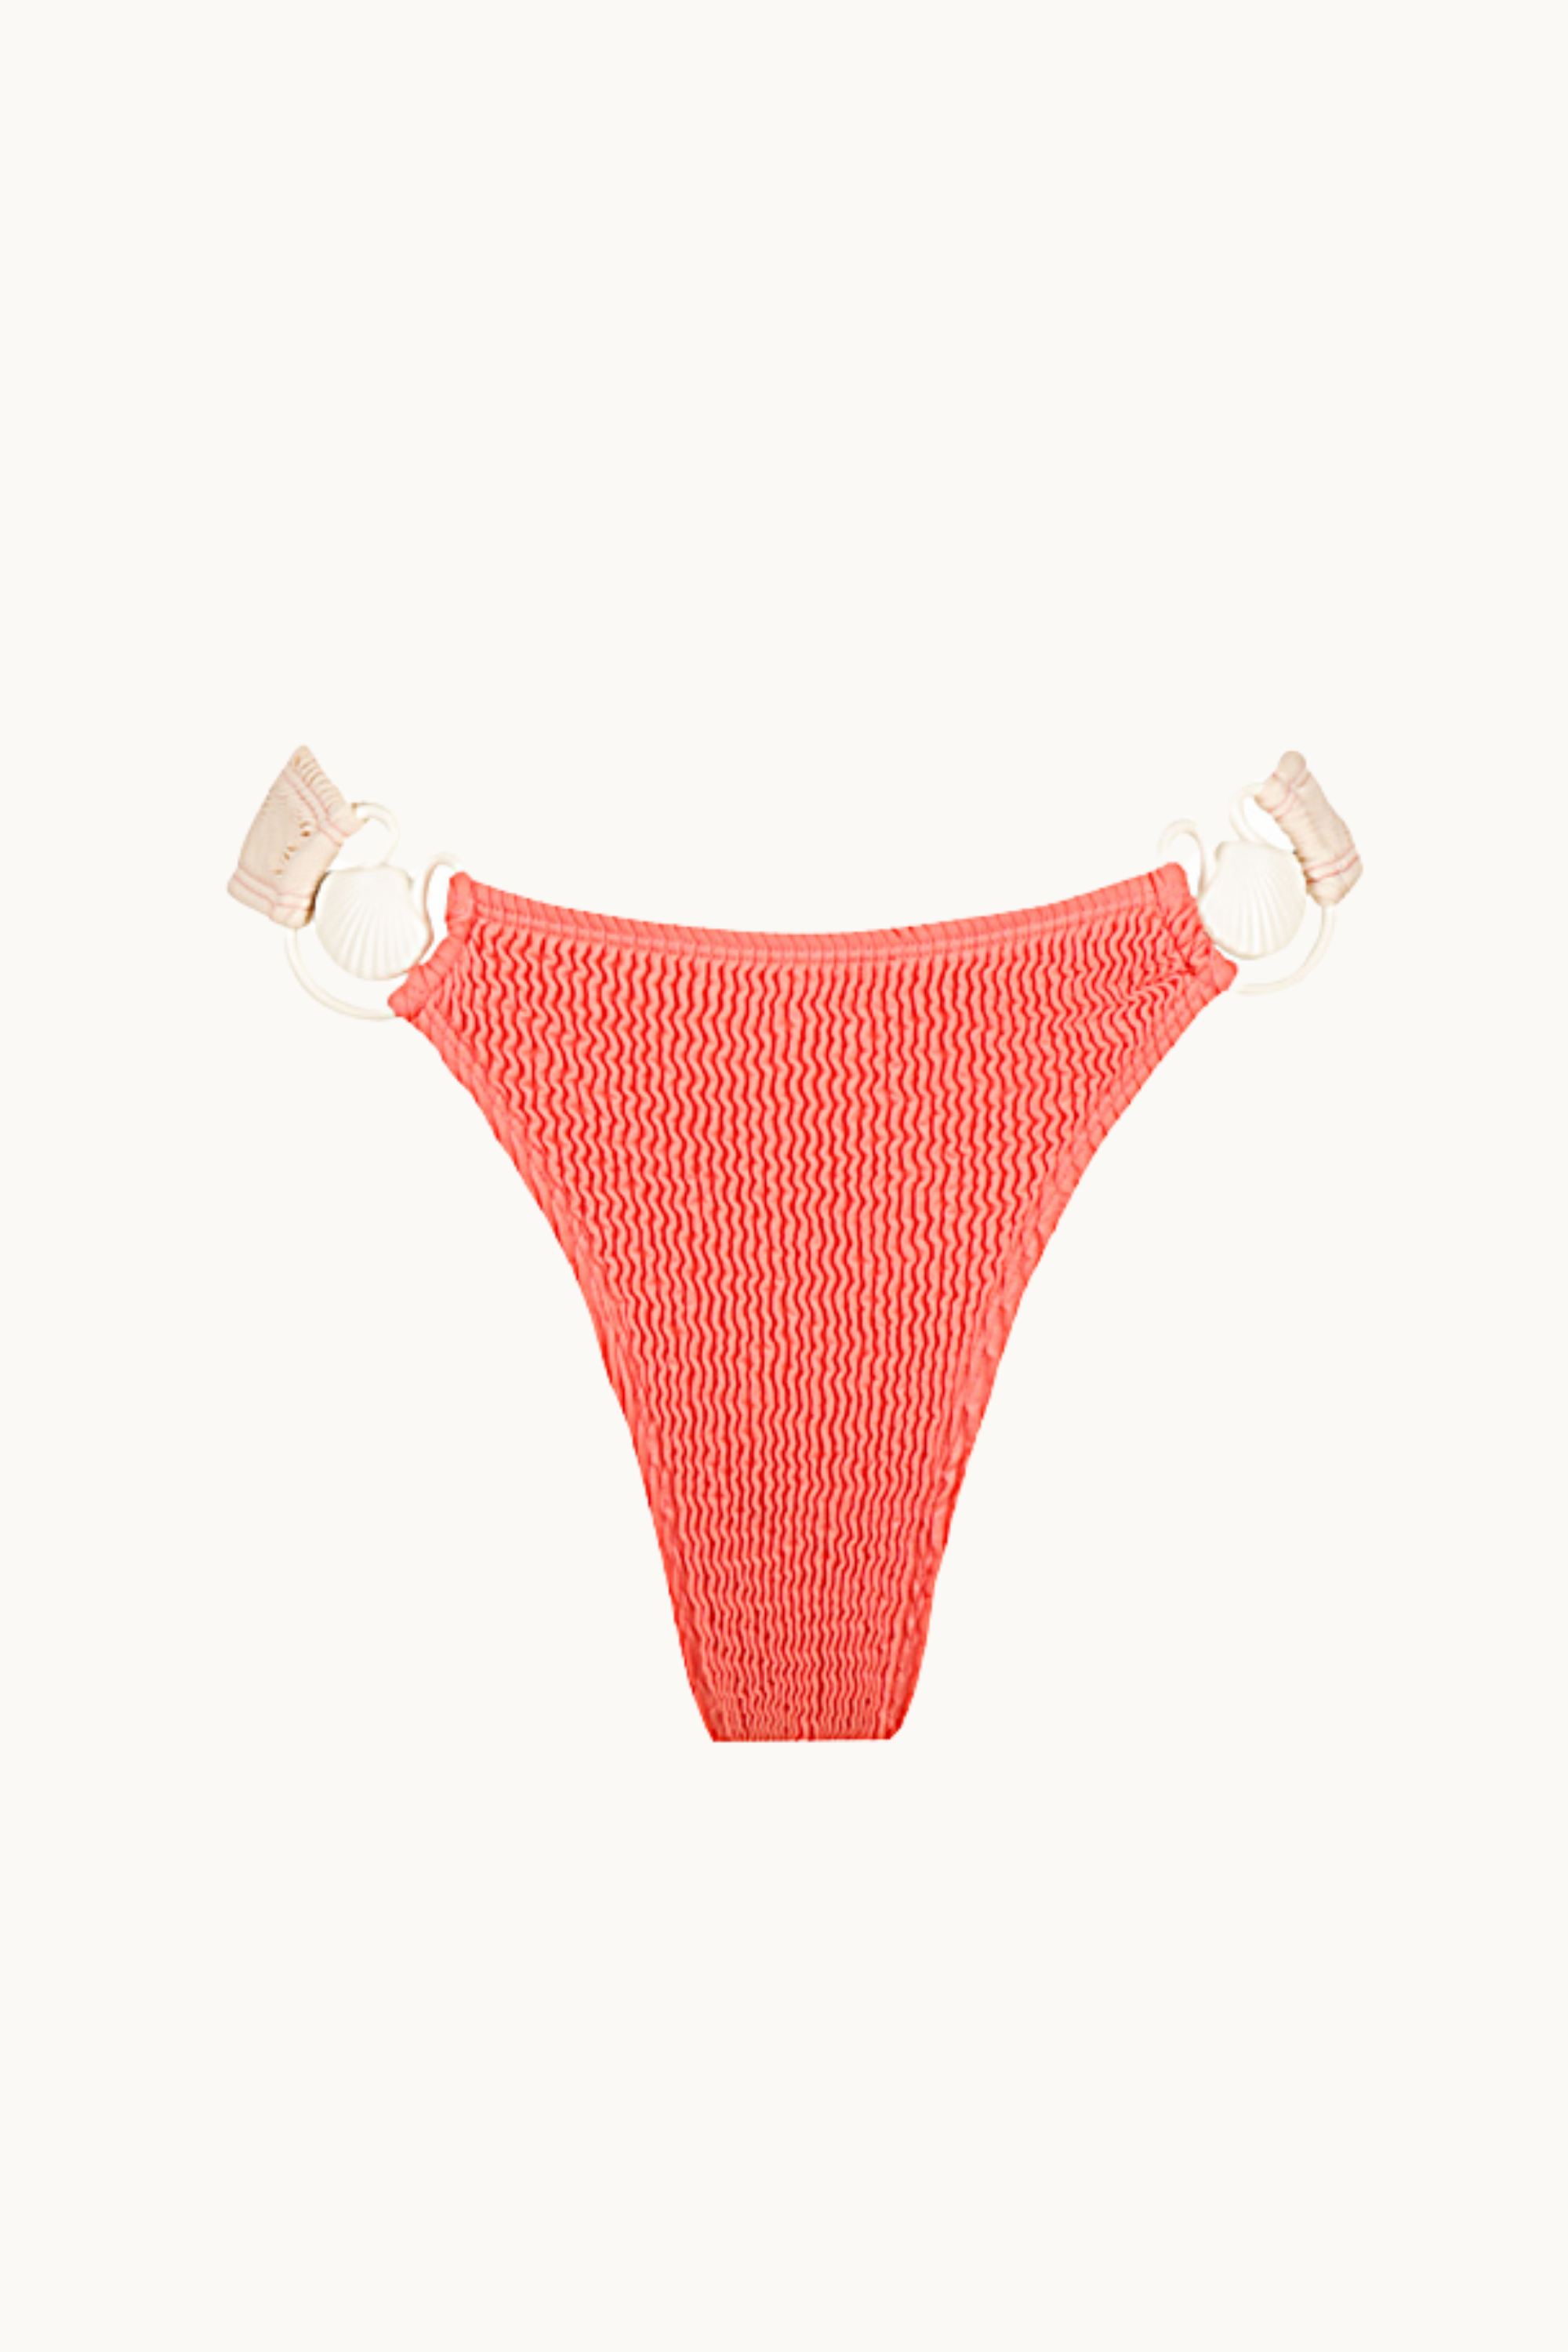 CORALINE BRIEF CORAL AND SHELL